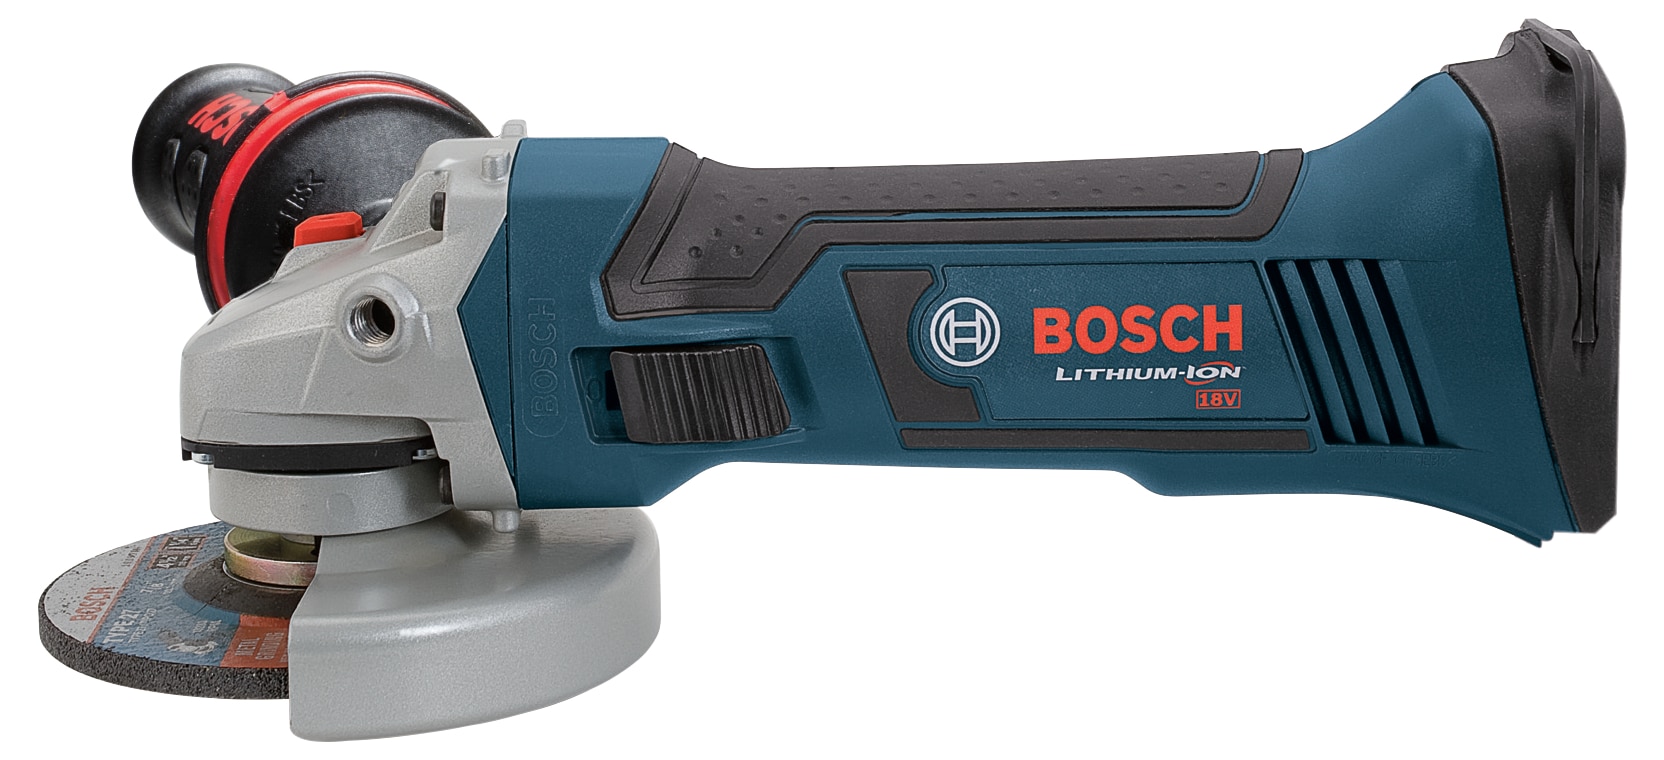 Bosch 12V Cordless Angle Grinder is Finally Here